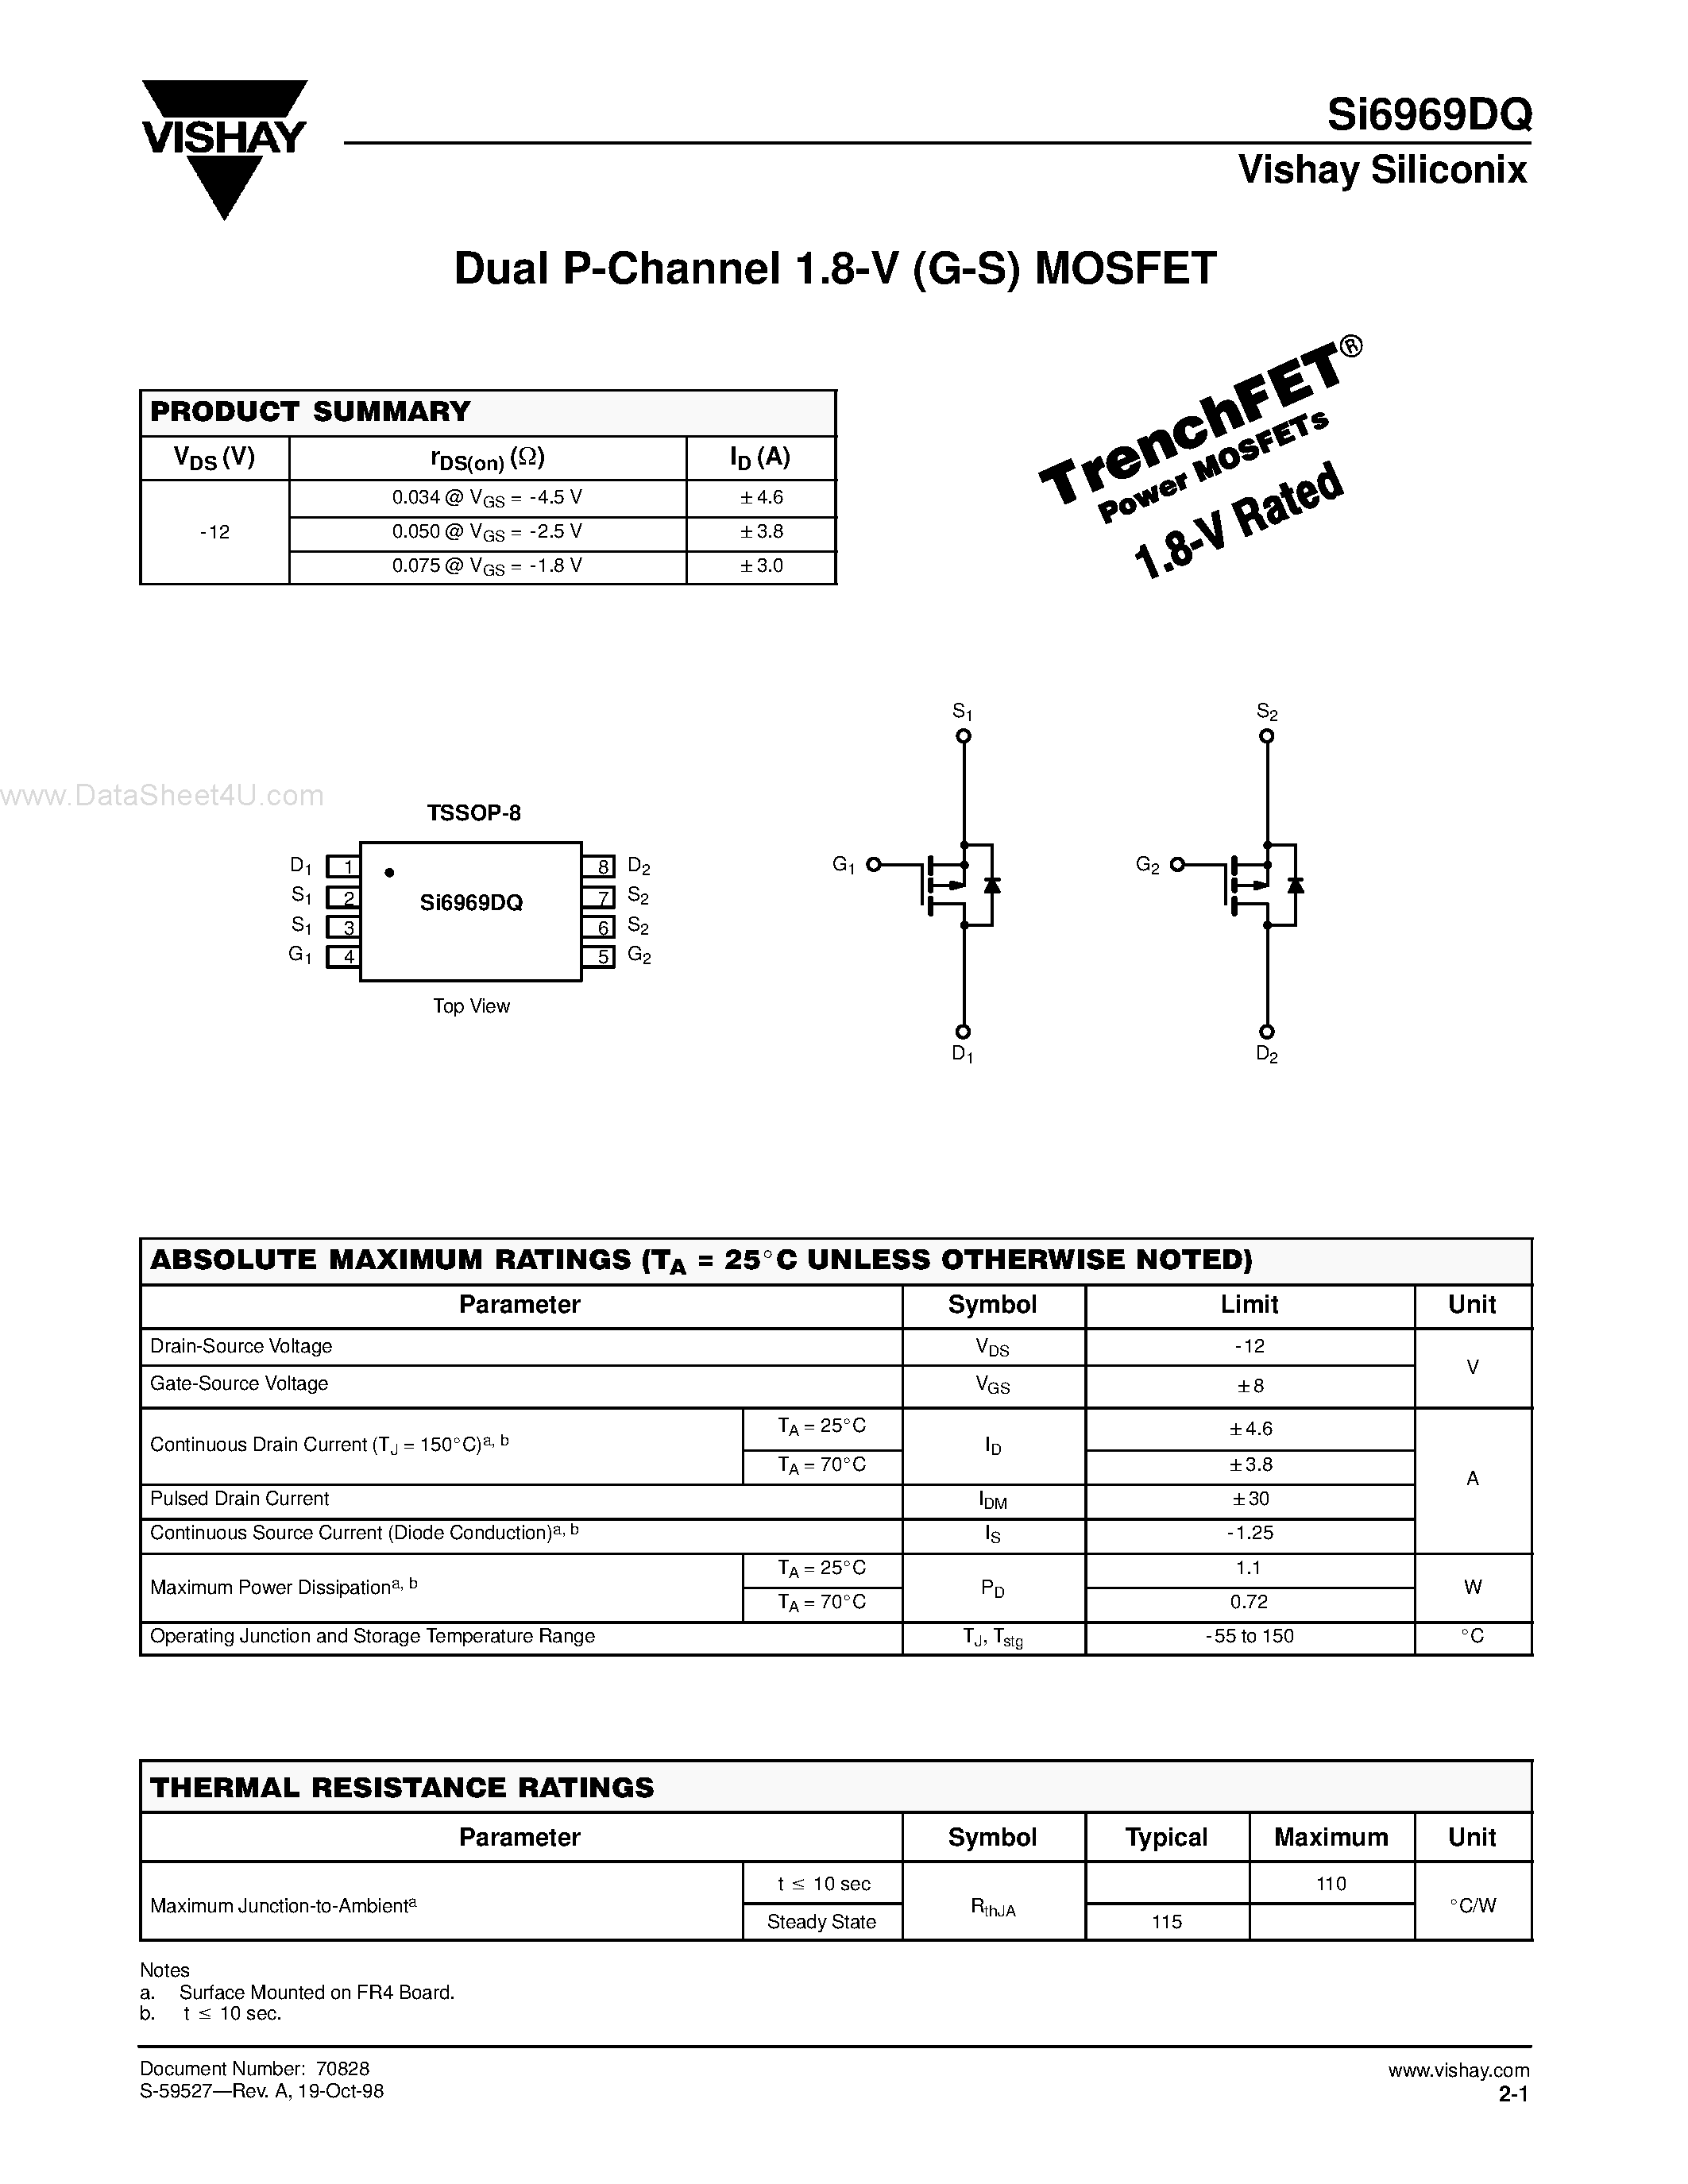 Даташит SI6969DQ - Dual P-Channel 1.8-V (G-S) MOSFET страница 1